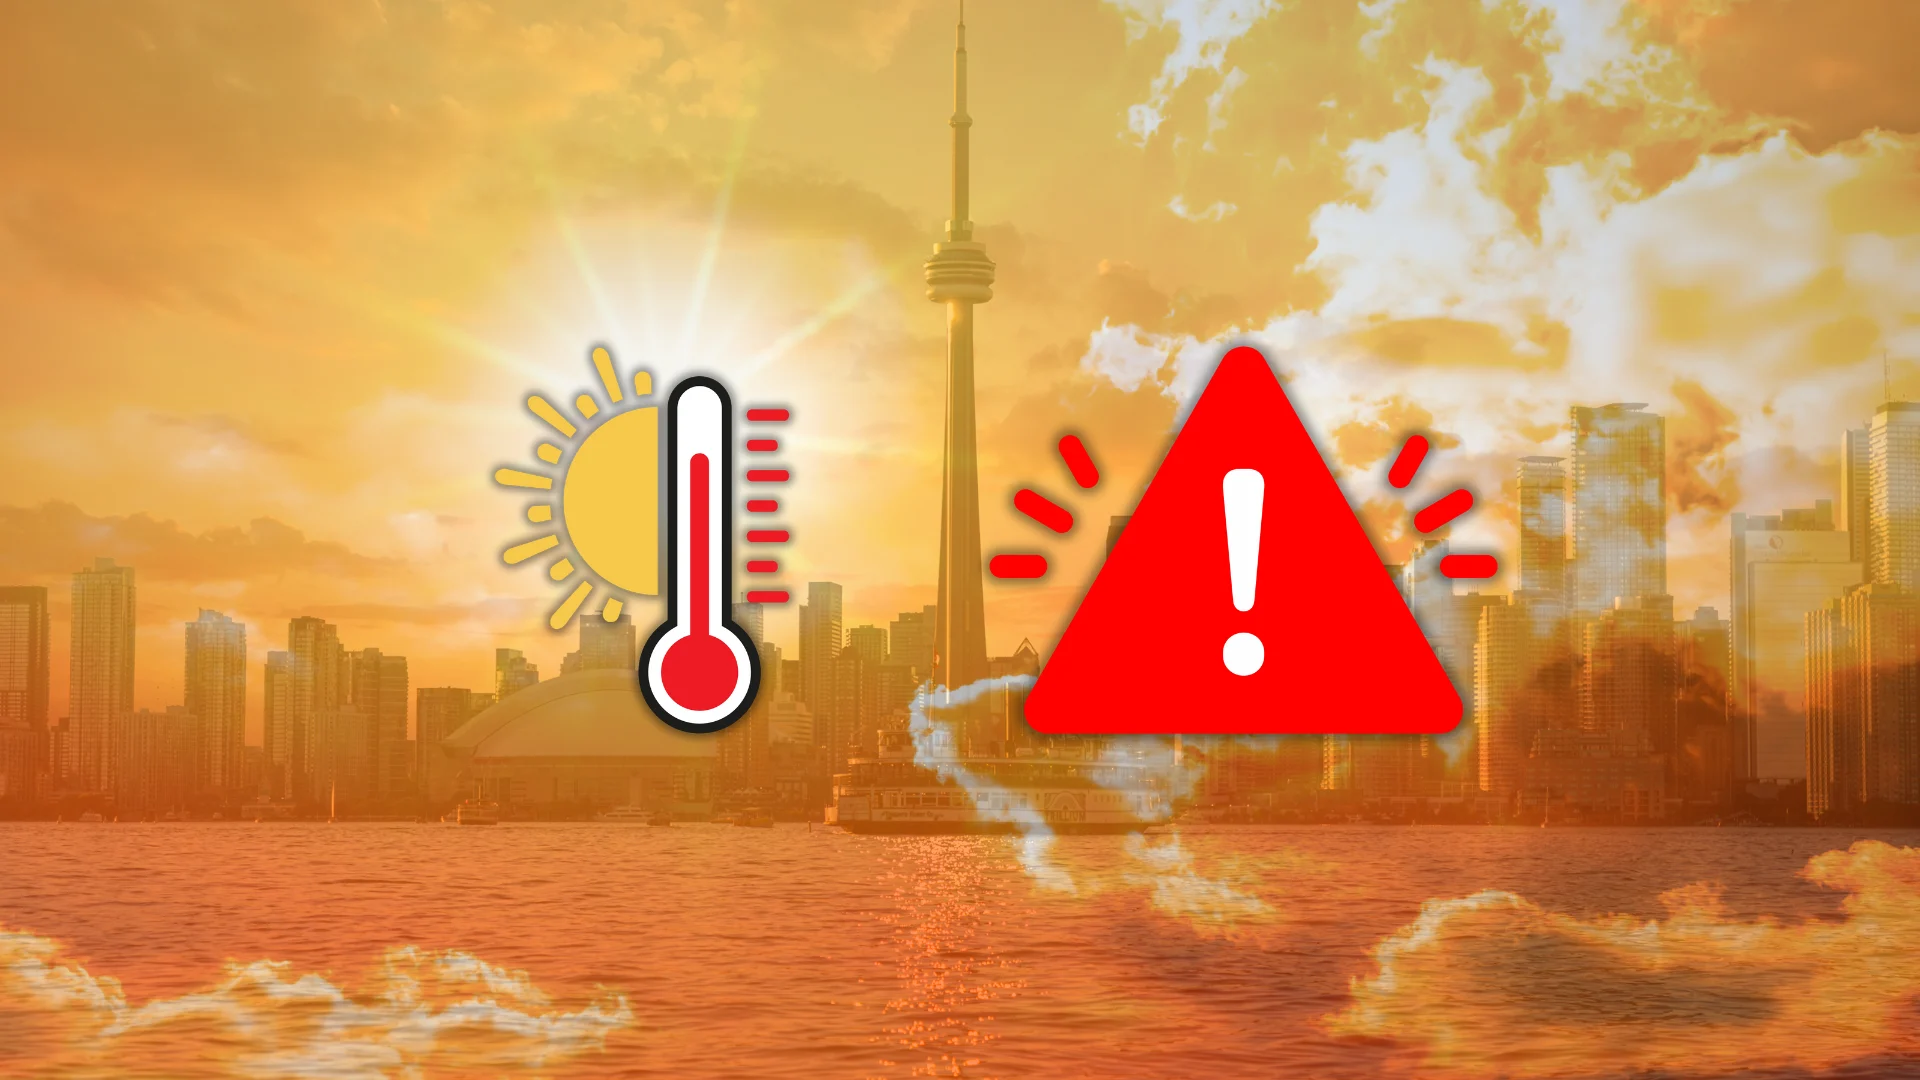 Vulnerable people will be at serious risk this week as a heat wave builds over Ontario. Timing, details, and safety info, here